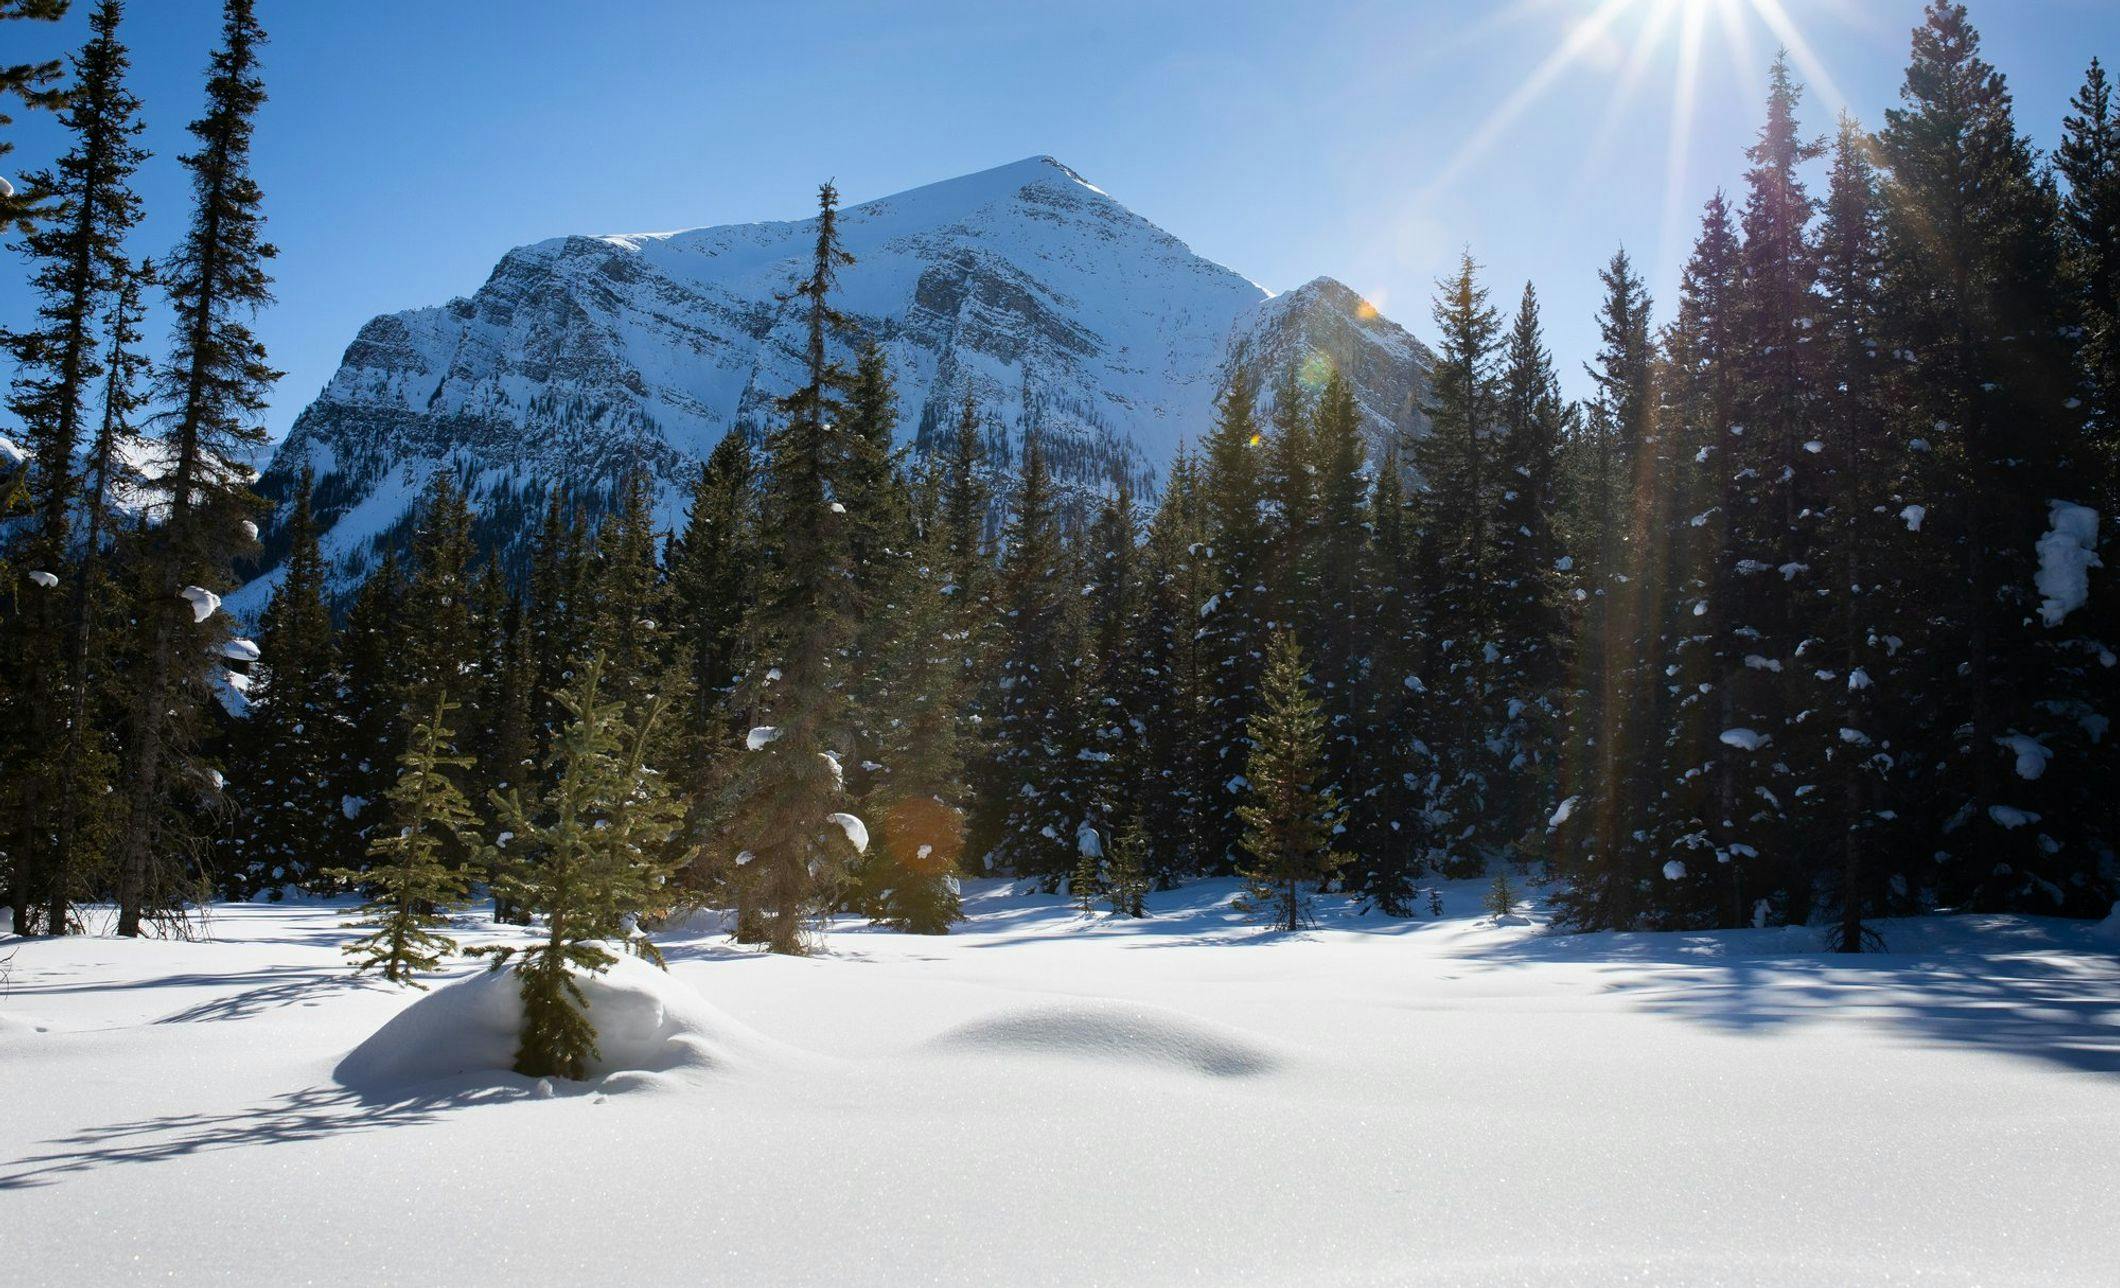 A forest is covered in a fresh blanket of snow that has not yet been touched. Sun beams down through snow covered trees and a snow-capped mountain can be seen in the background